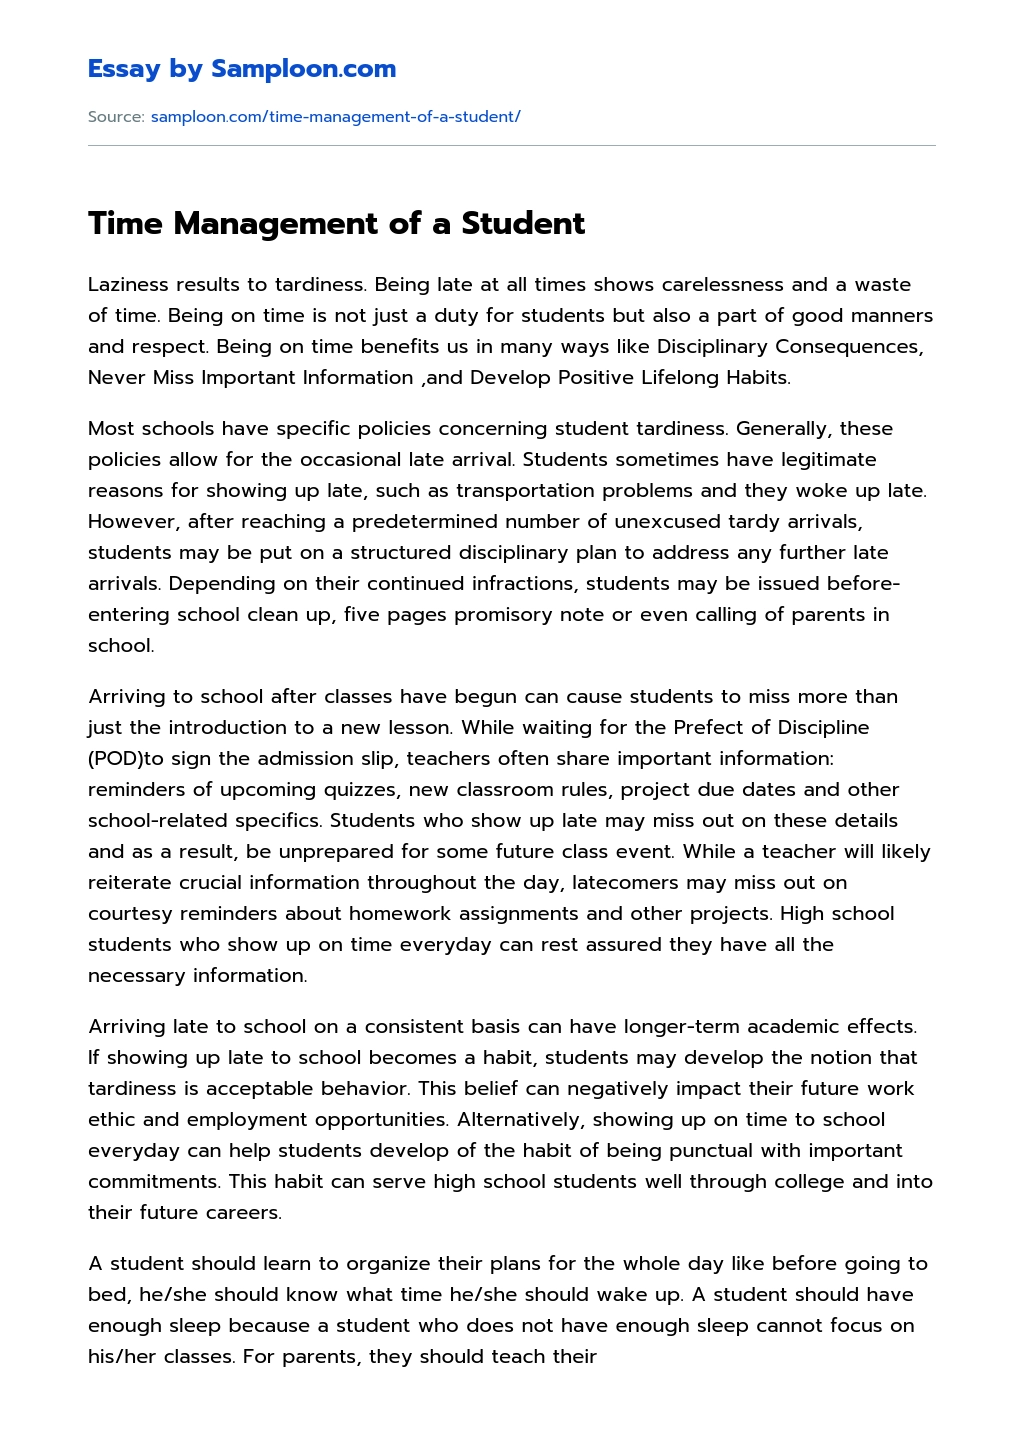 thesis statement of time management